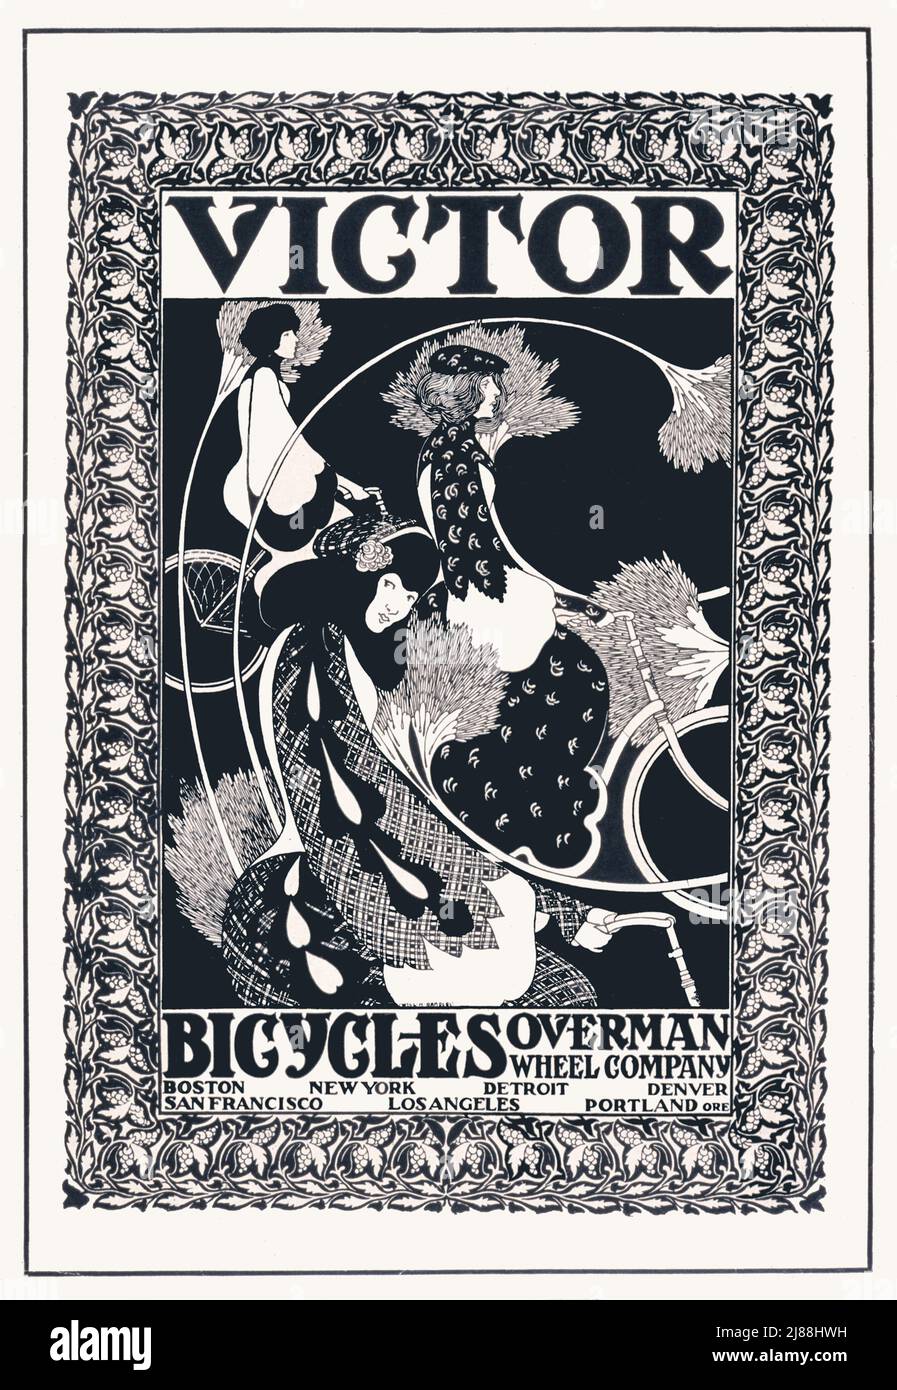 A late 19th century American Art Nouveau poster of 1895 for Victor bicycles of Boston, New York. The artist is Will Bradley (1868-1962) Stock Photo